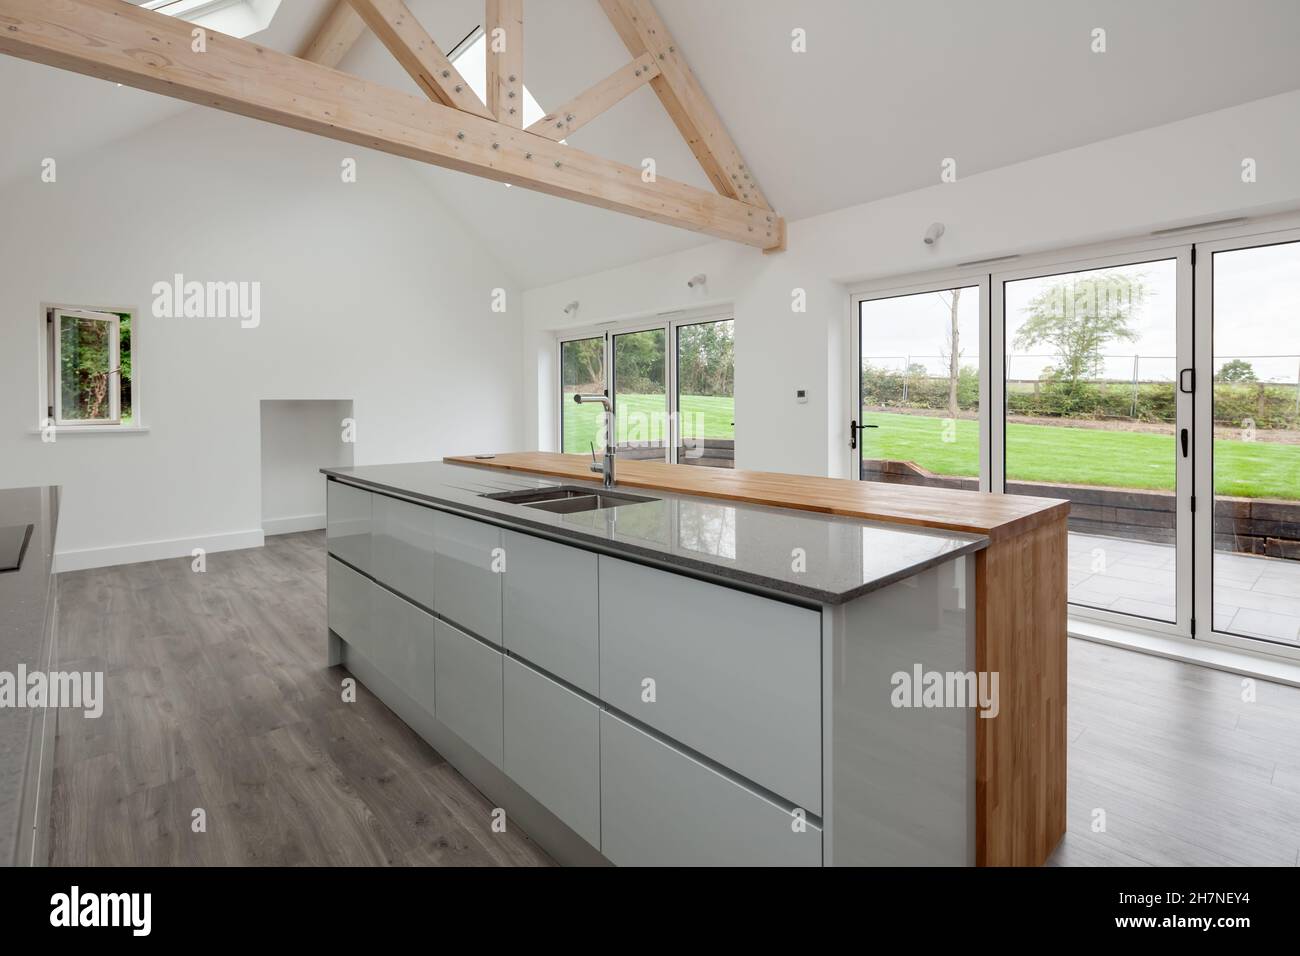 Lolworth, Cambridgeshire - July 30 2019: Brand new unoccupied home kitchen with vaulted ceiling and island peninsula unit Stock Photo